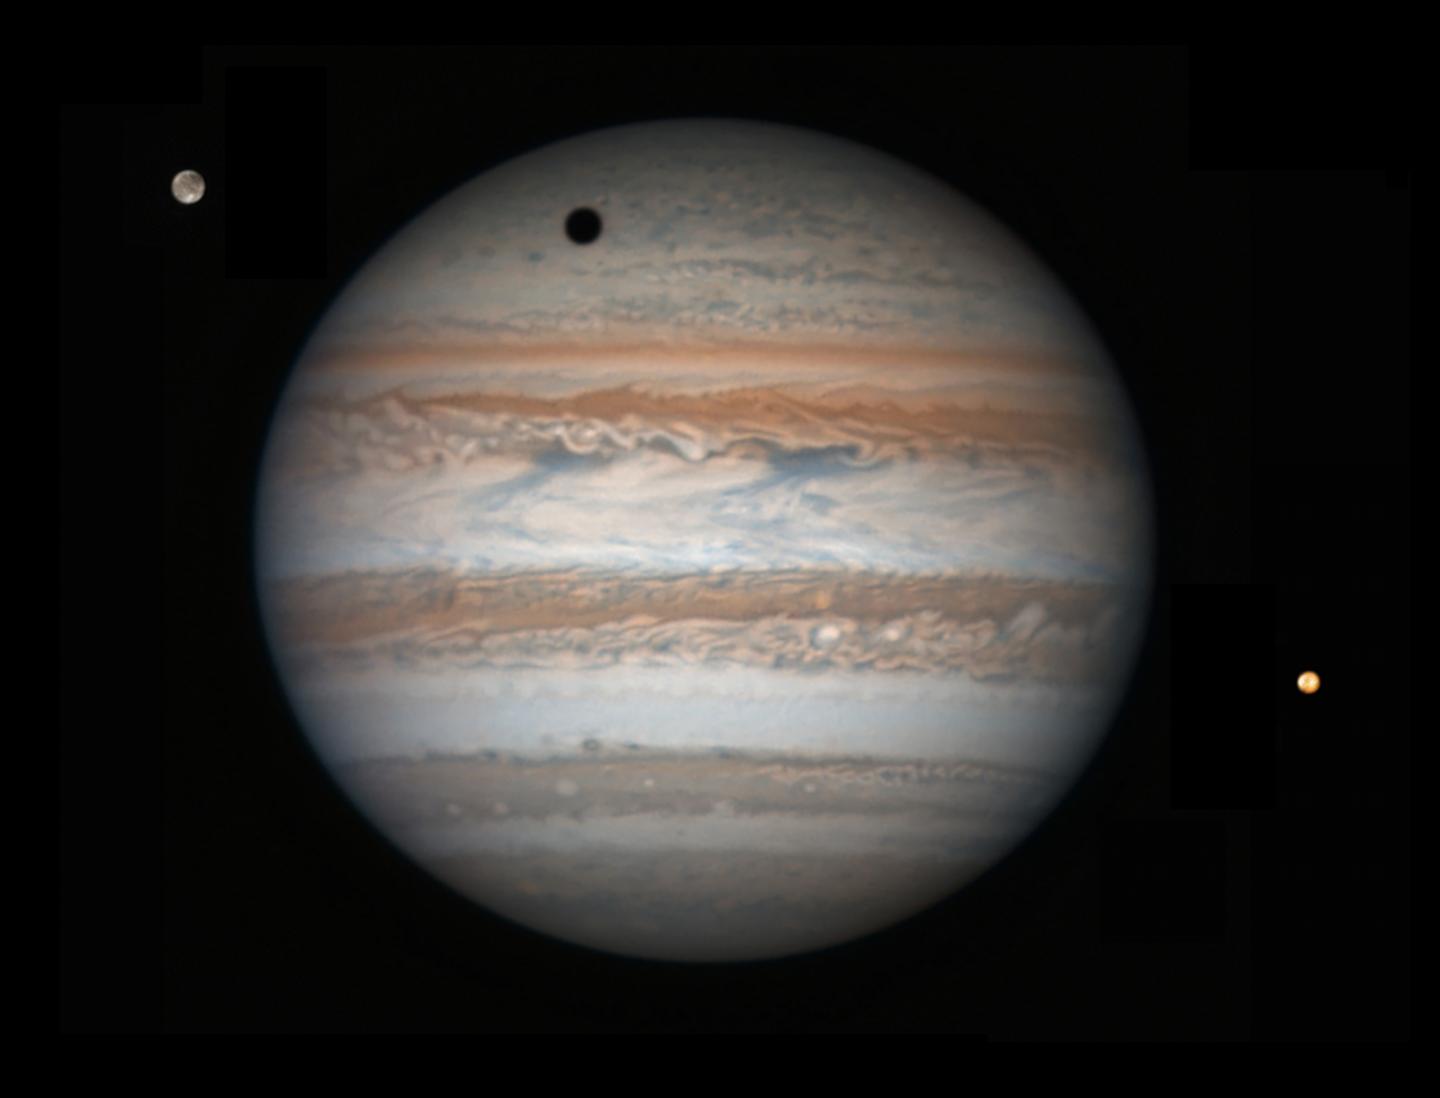 Jovian transit © Damian Peach, Insight Investment Astronomy Photographer of the Year 2018